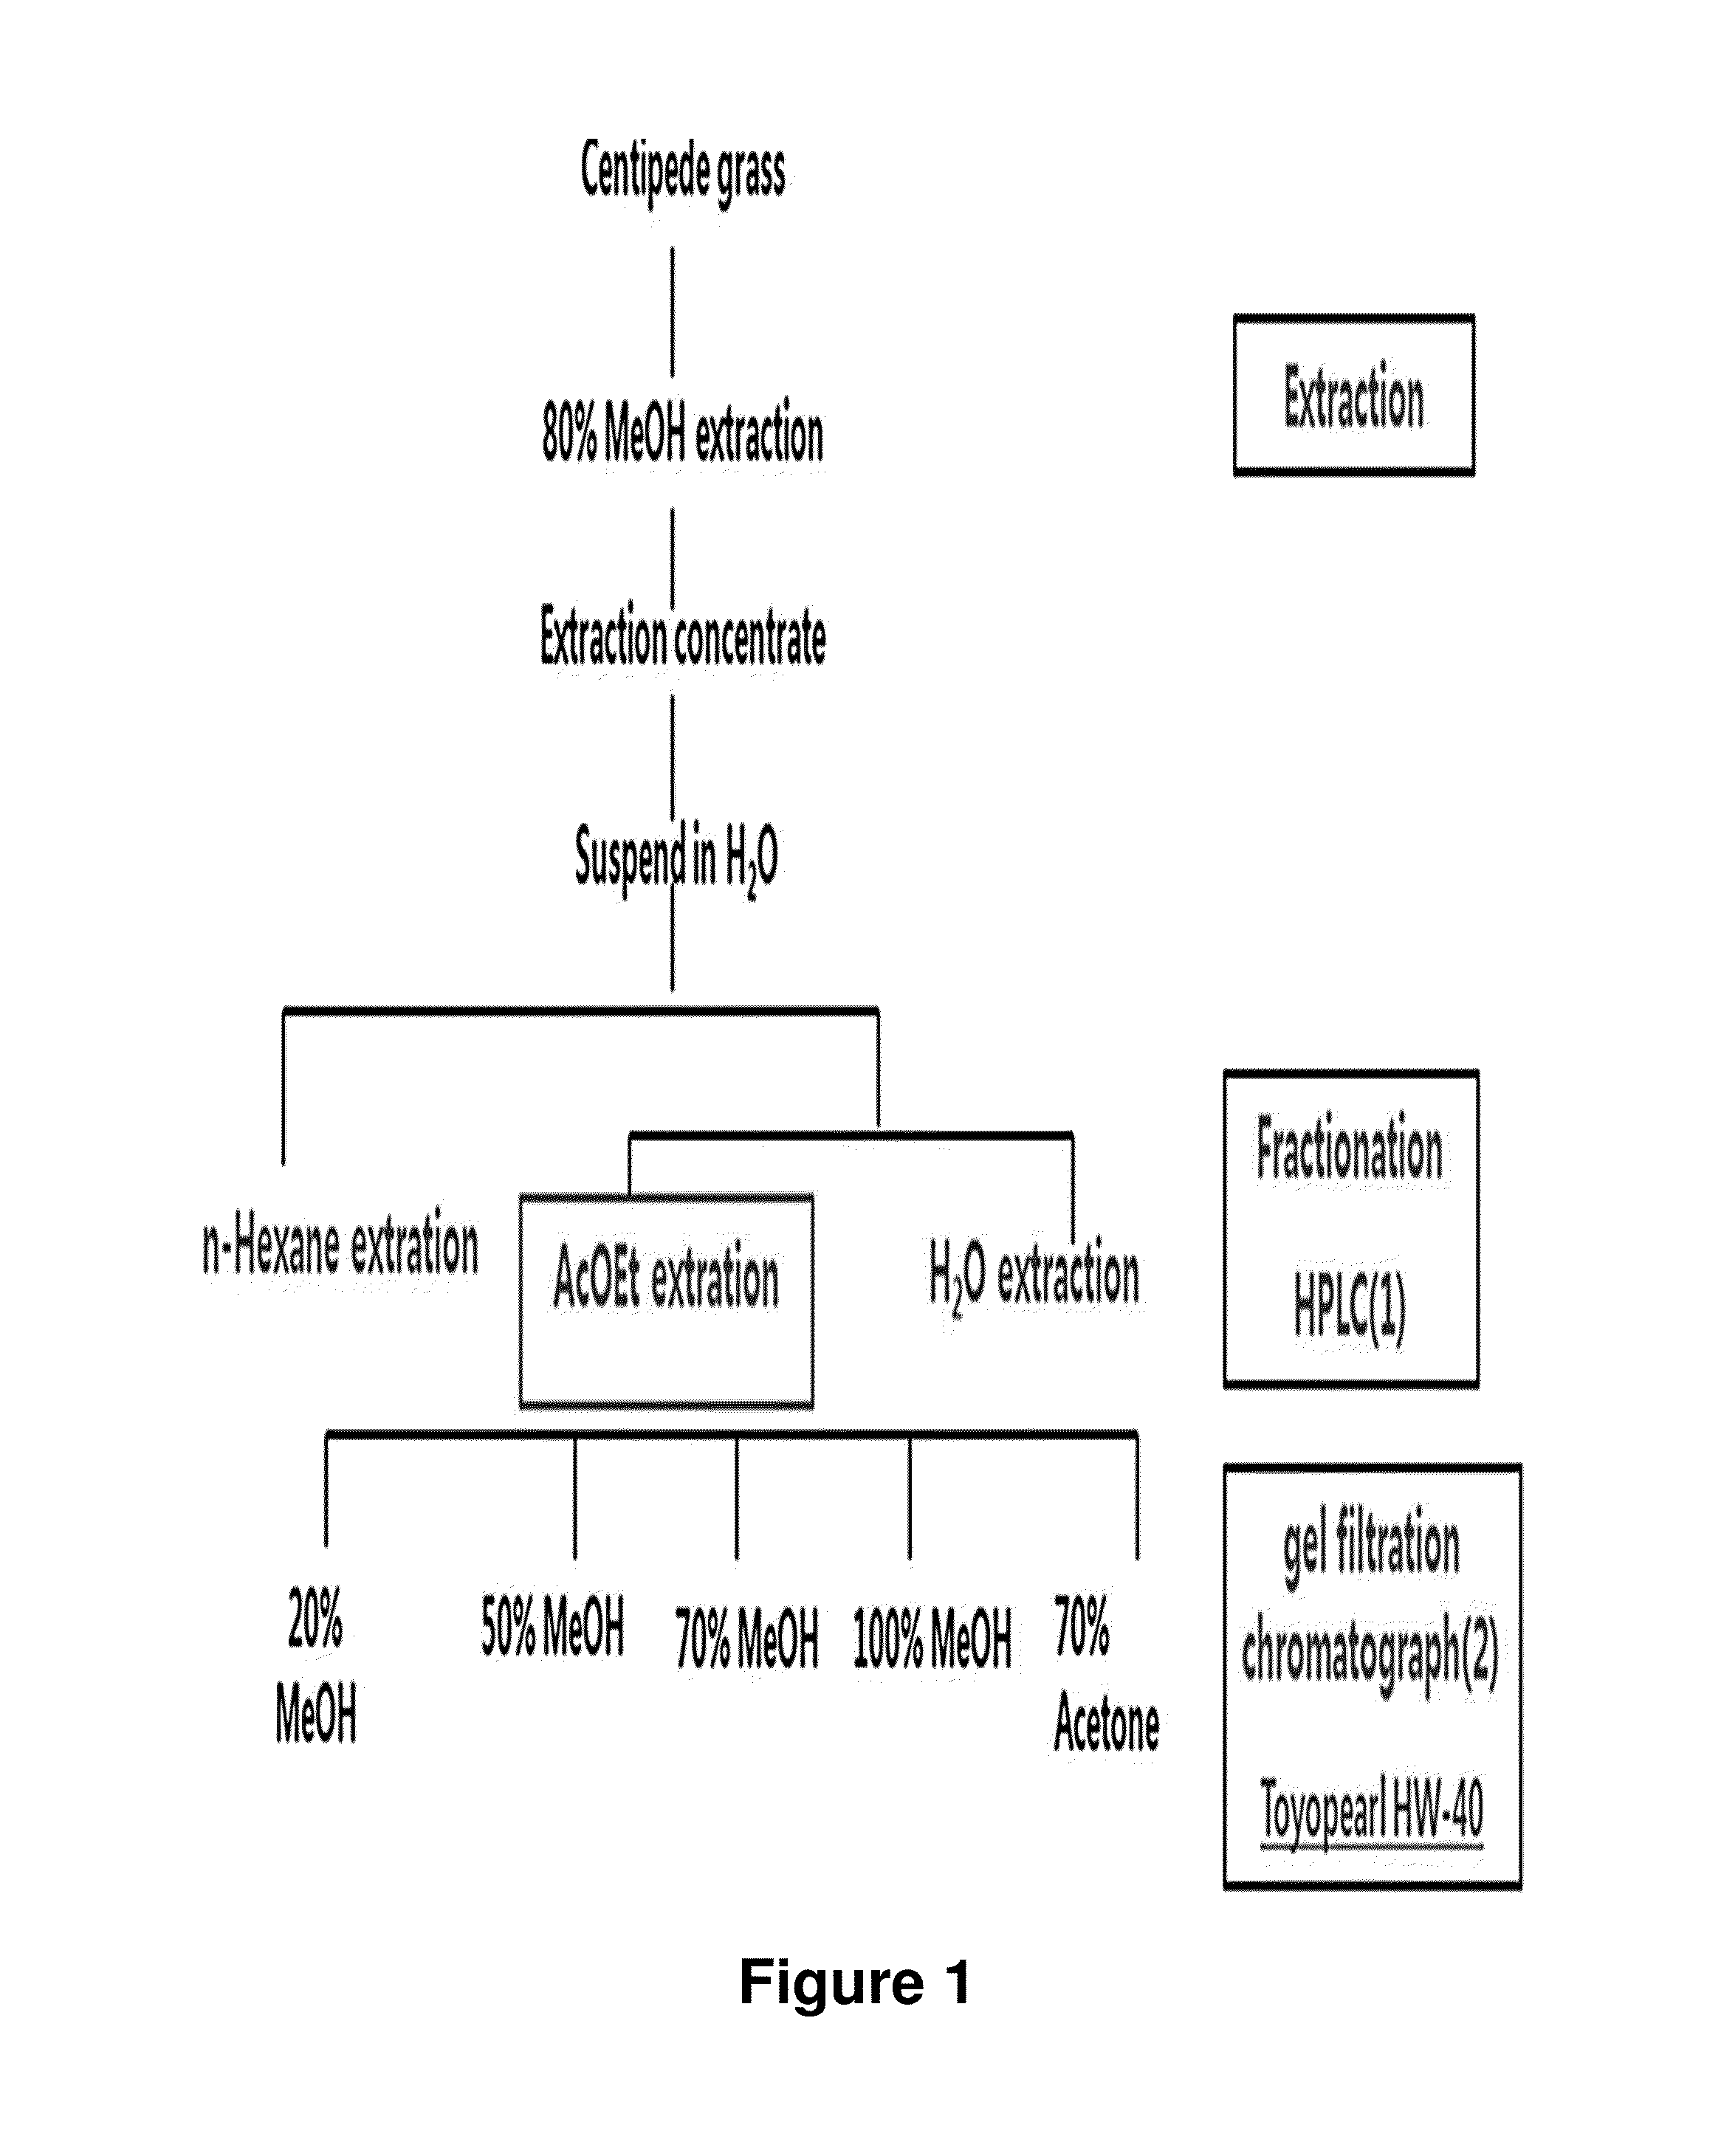 Composition Comprising Centipede Grass Extracts or Fractions Thereof as Active Ingredients